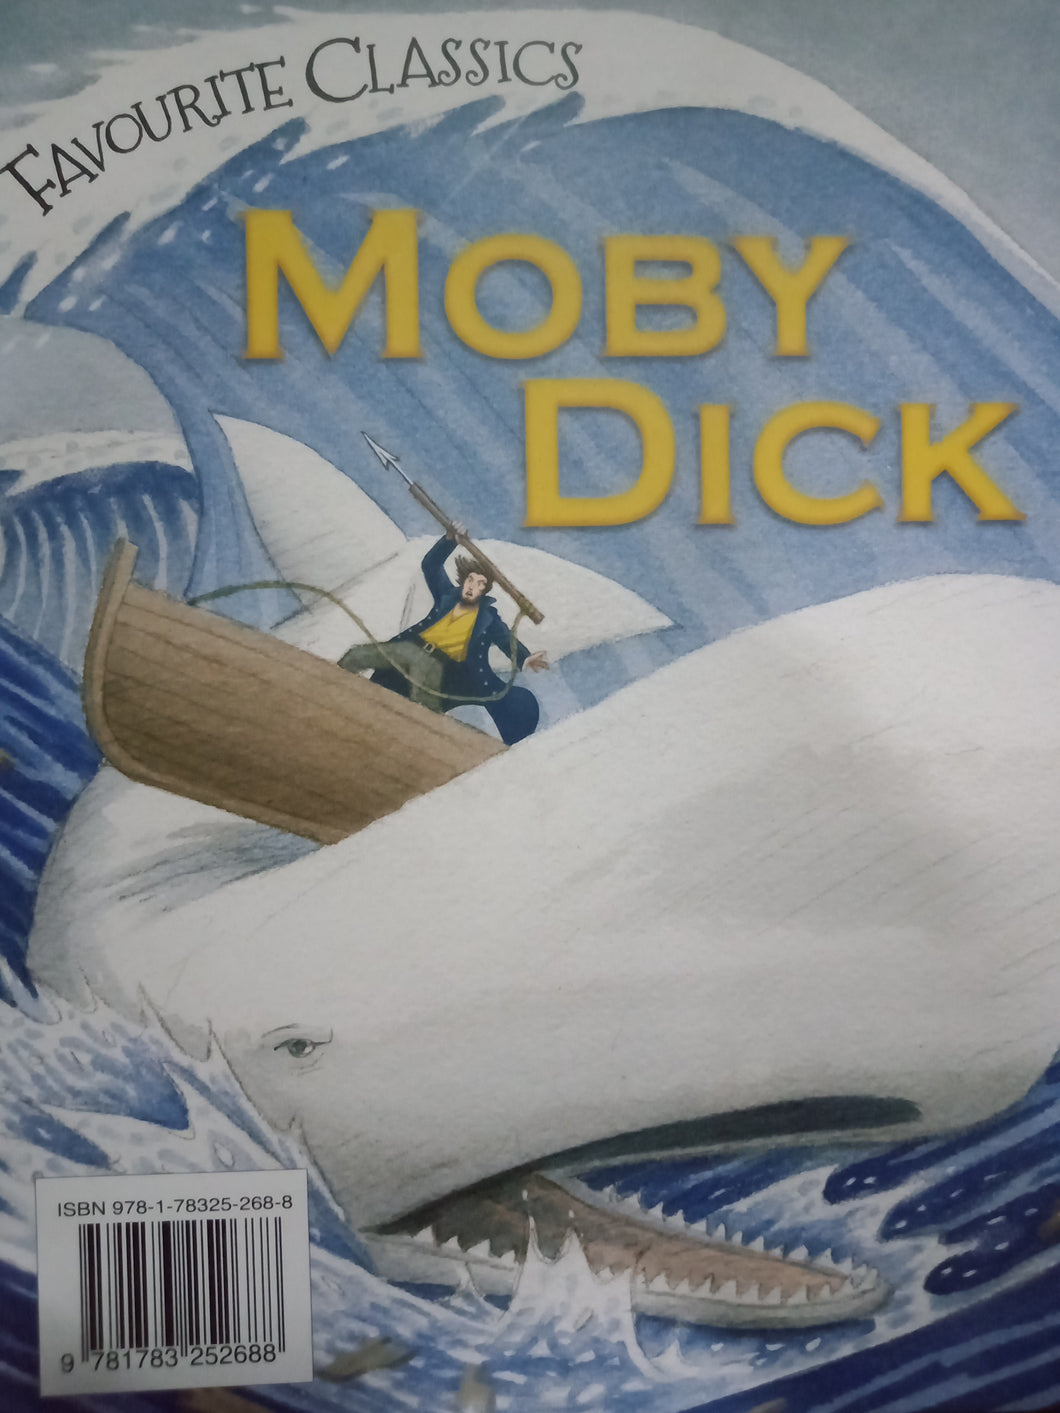 Favorite Classic: Moby Dick